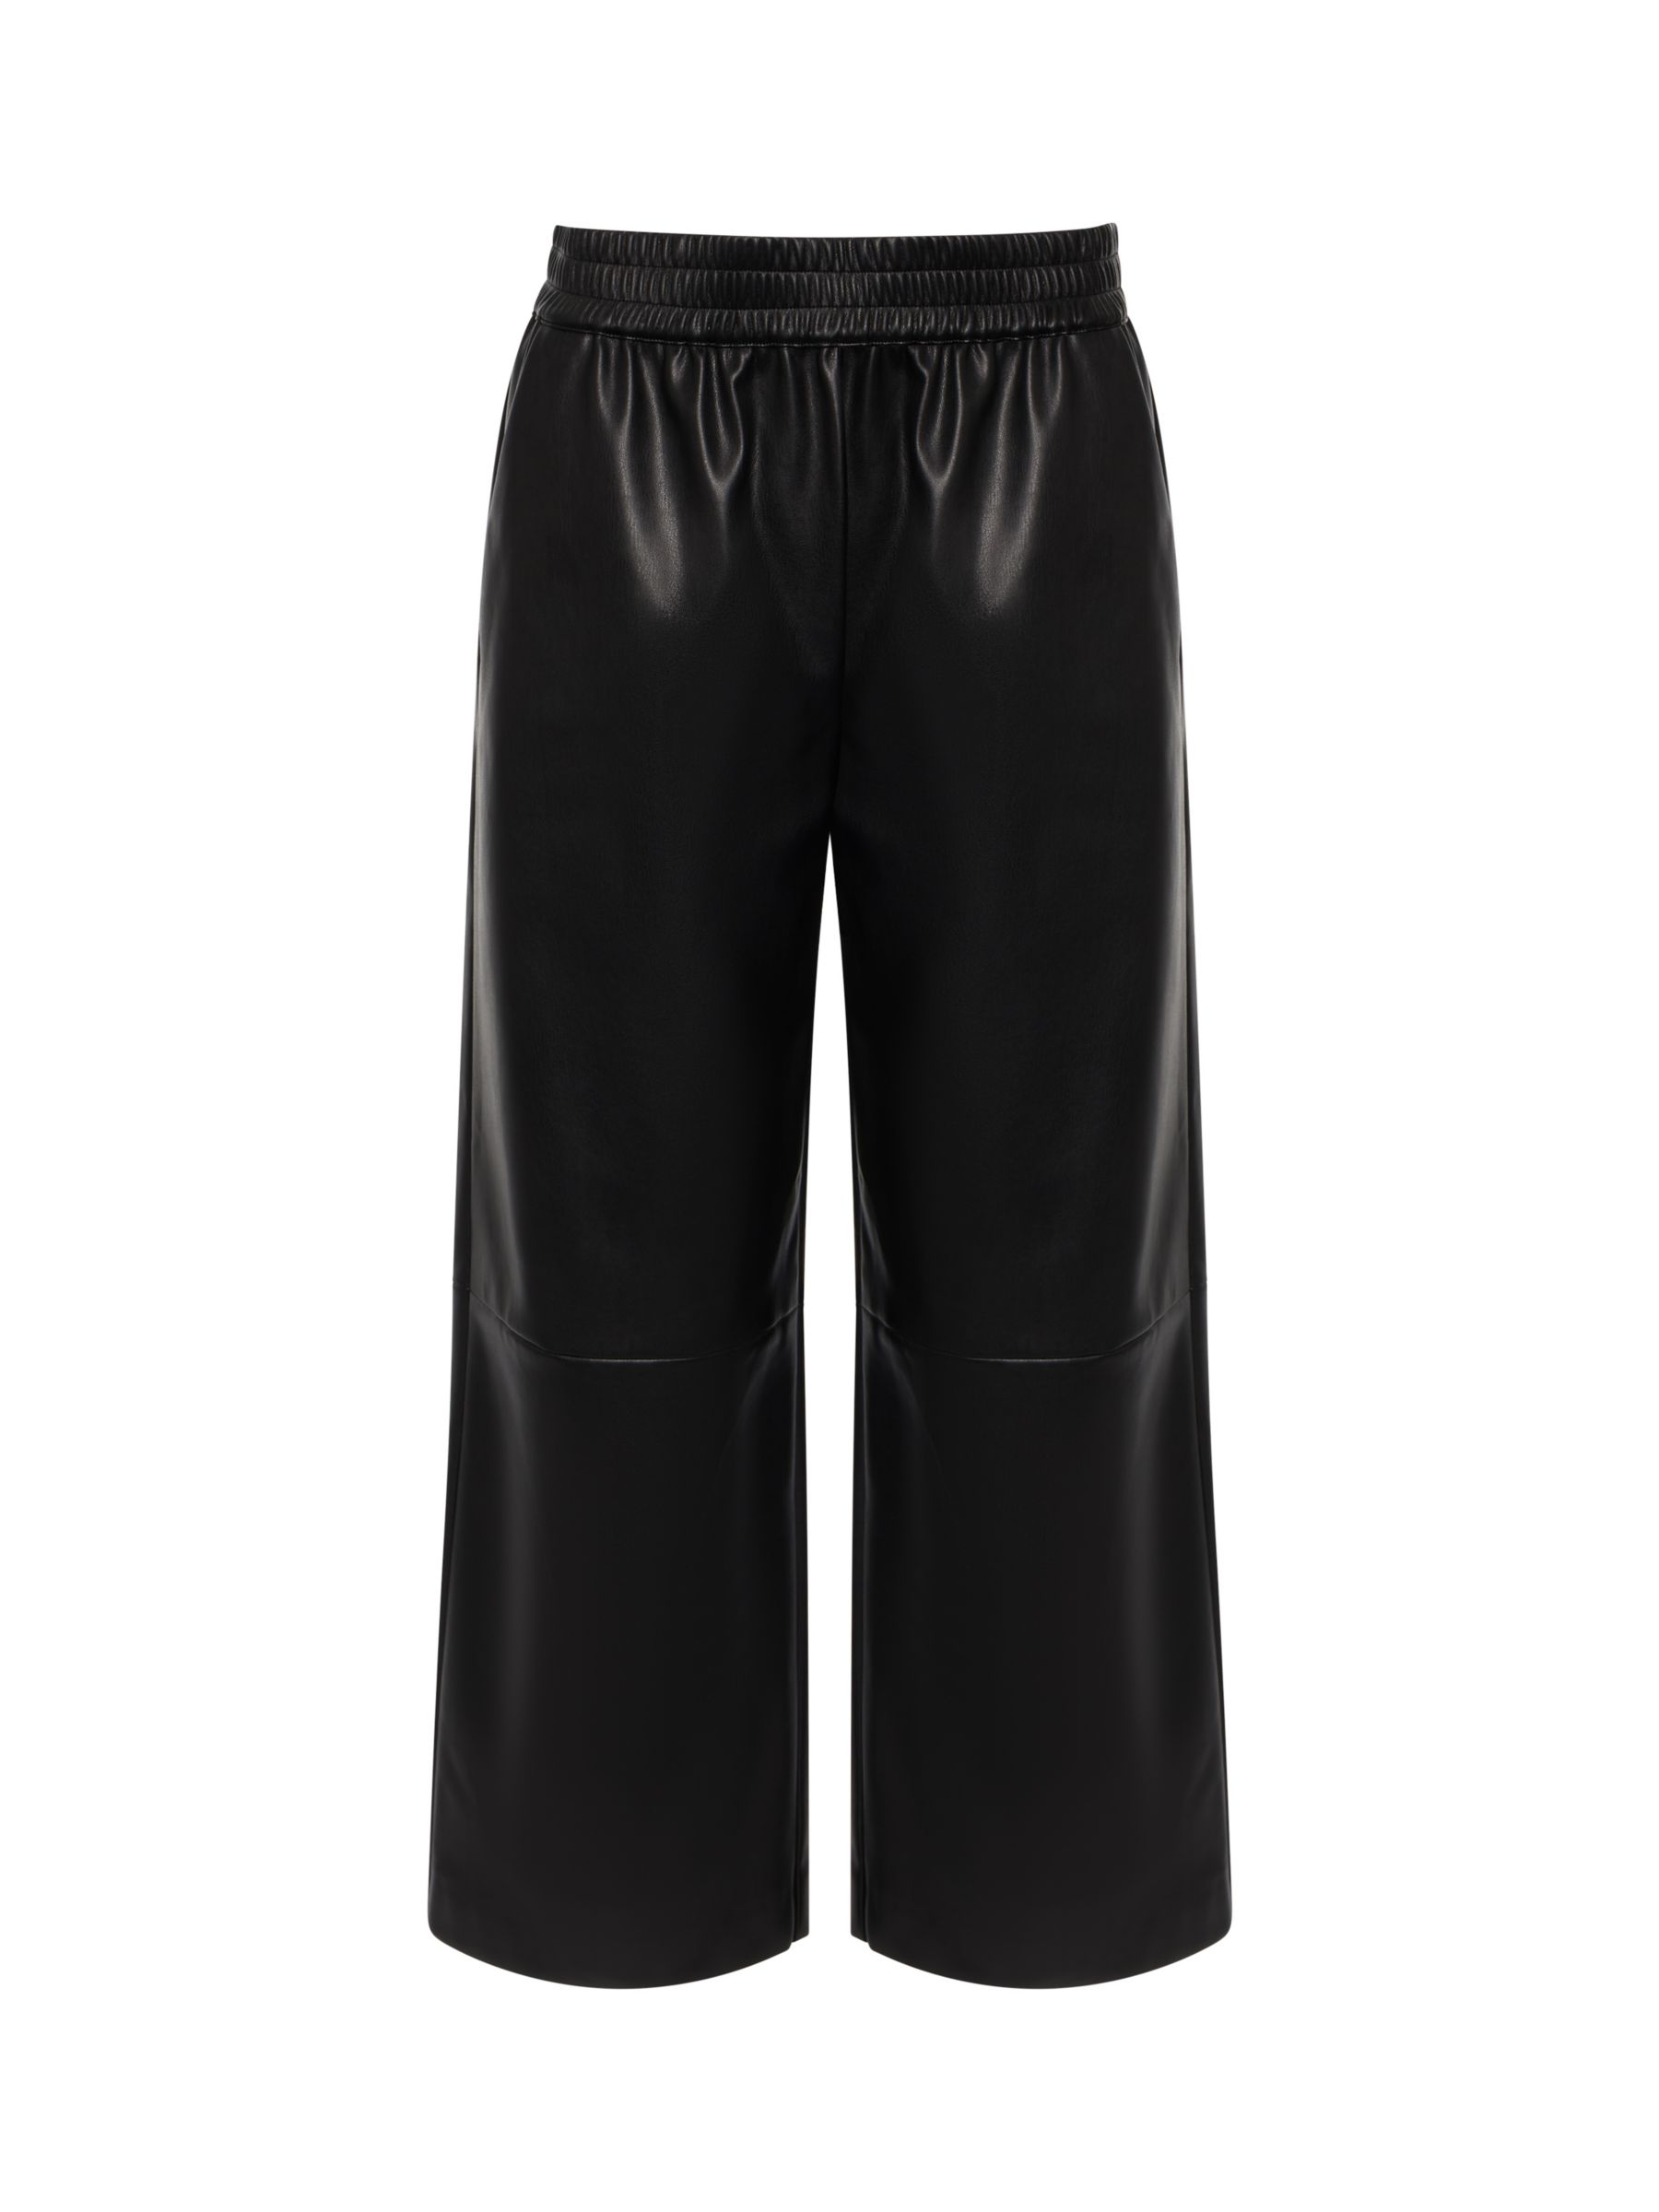 French Connection Etta Wide Leg Faux Leather Trousers, Black at John ...